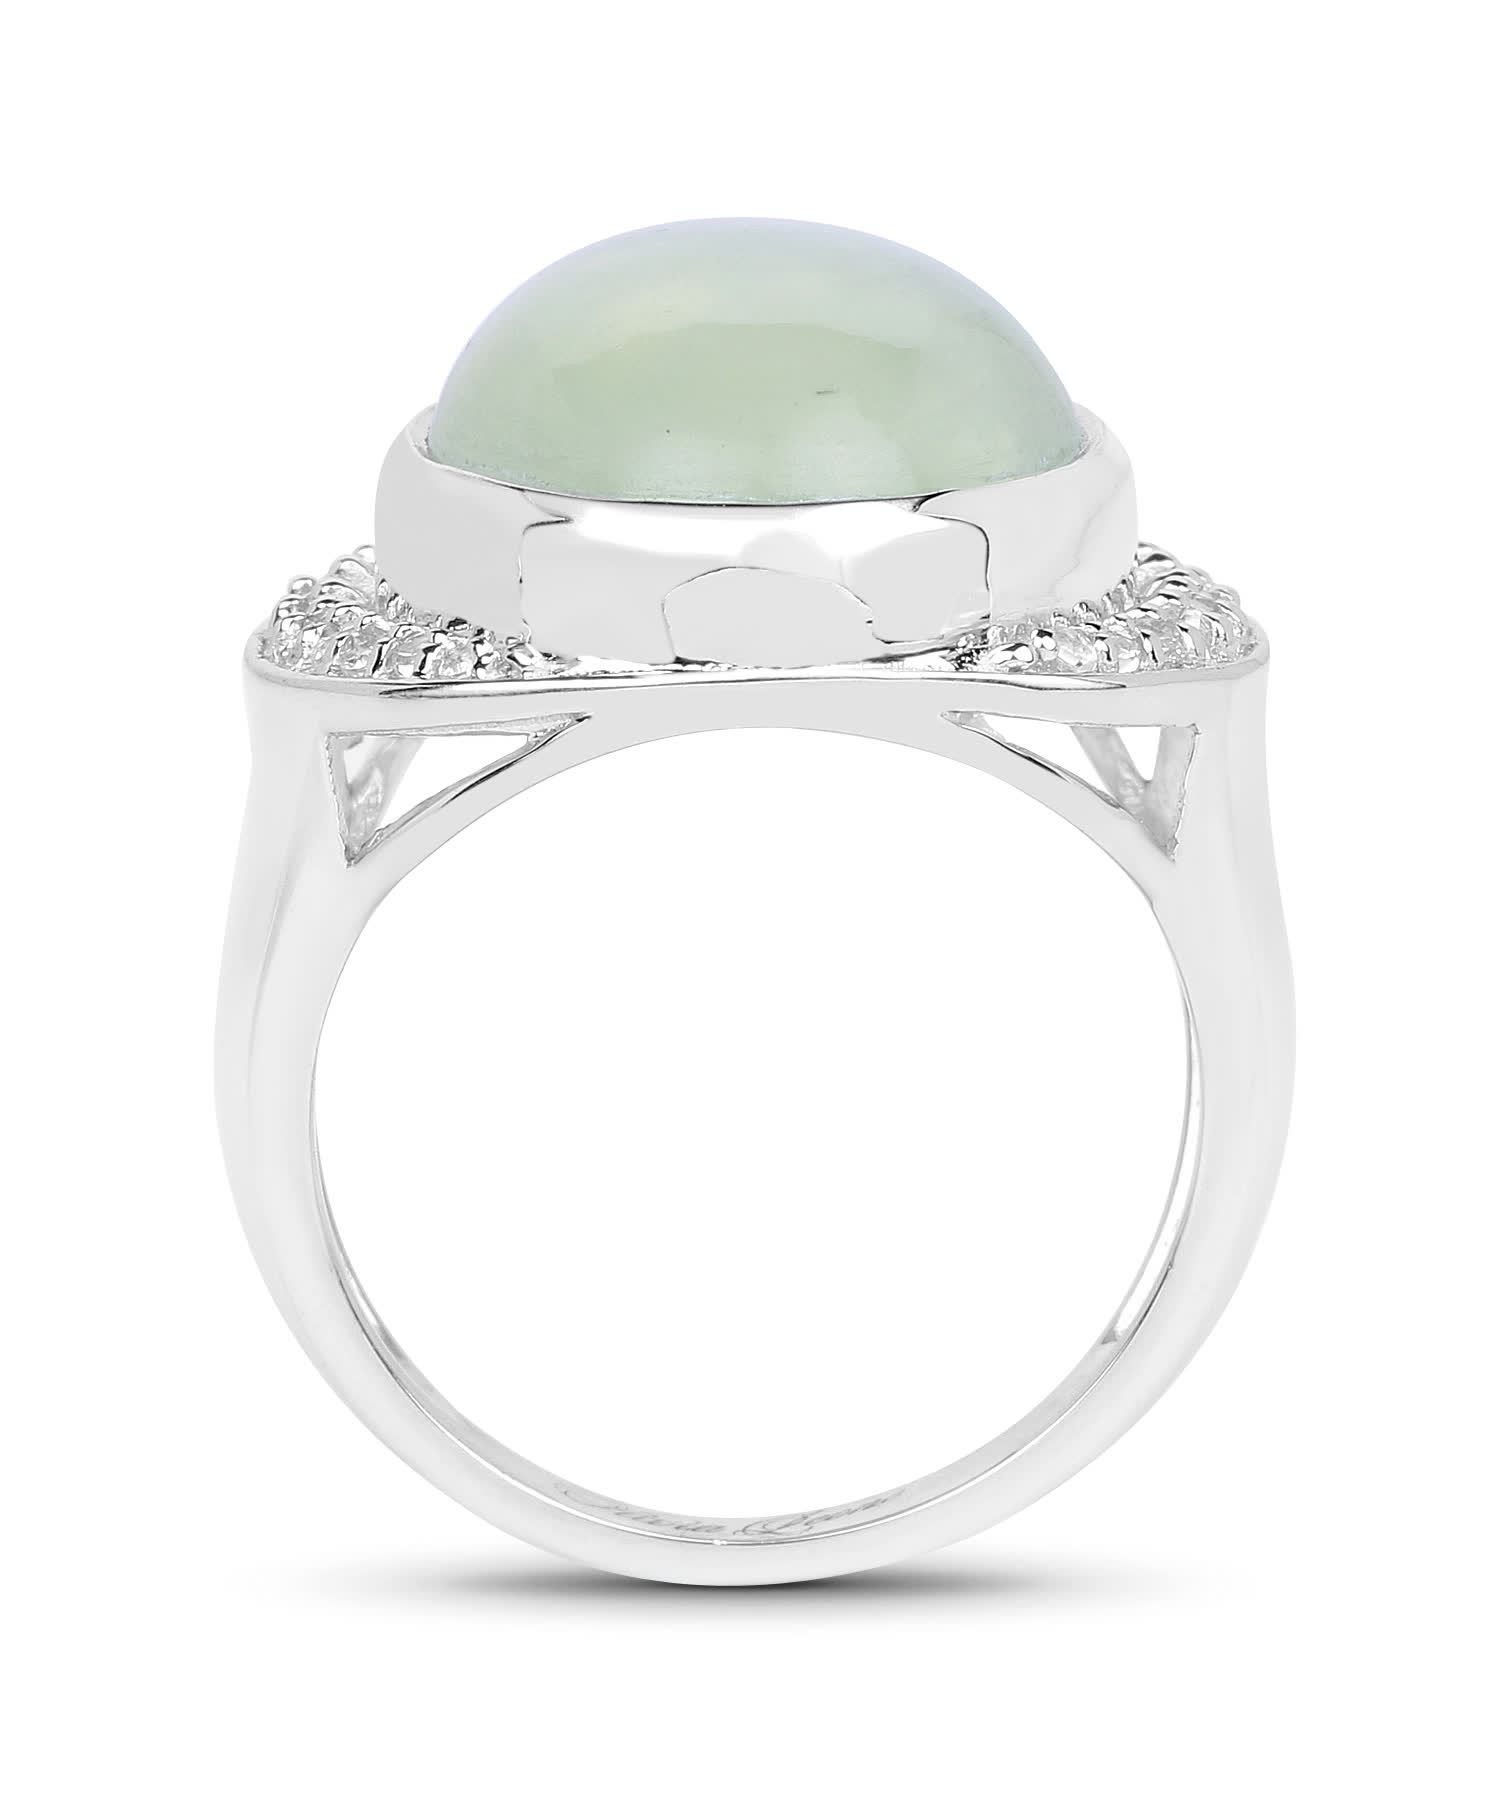 11.50ctw Natural Prehnite and Topaz Rhodium Plated 925 Sterling Silver Oval Cocktail Ring View 2